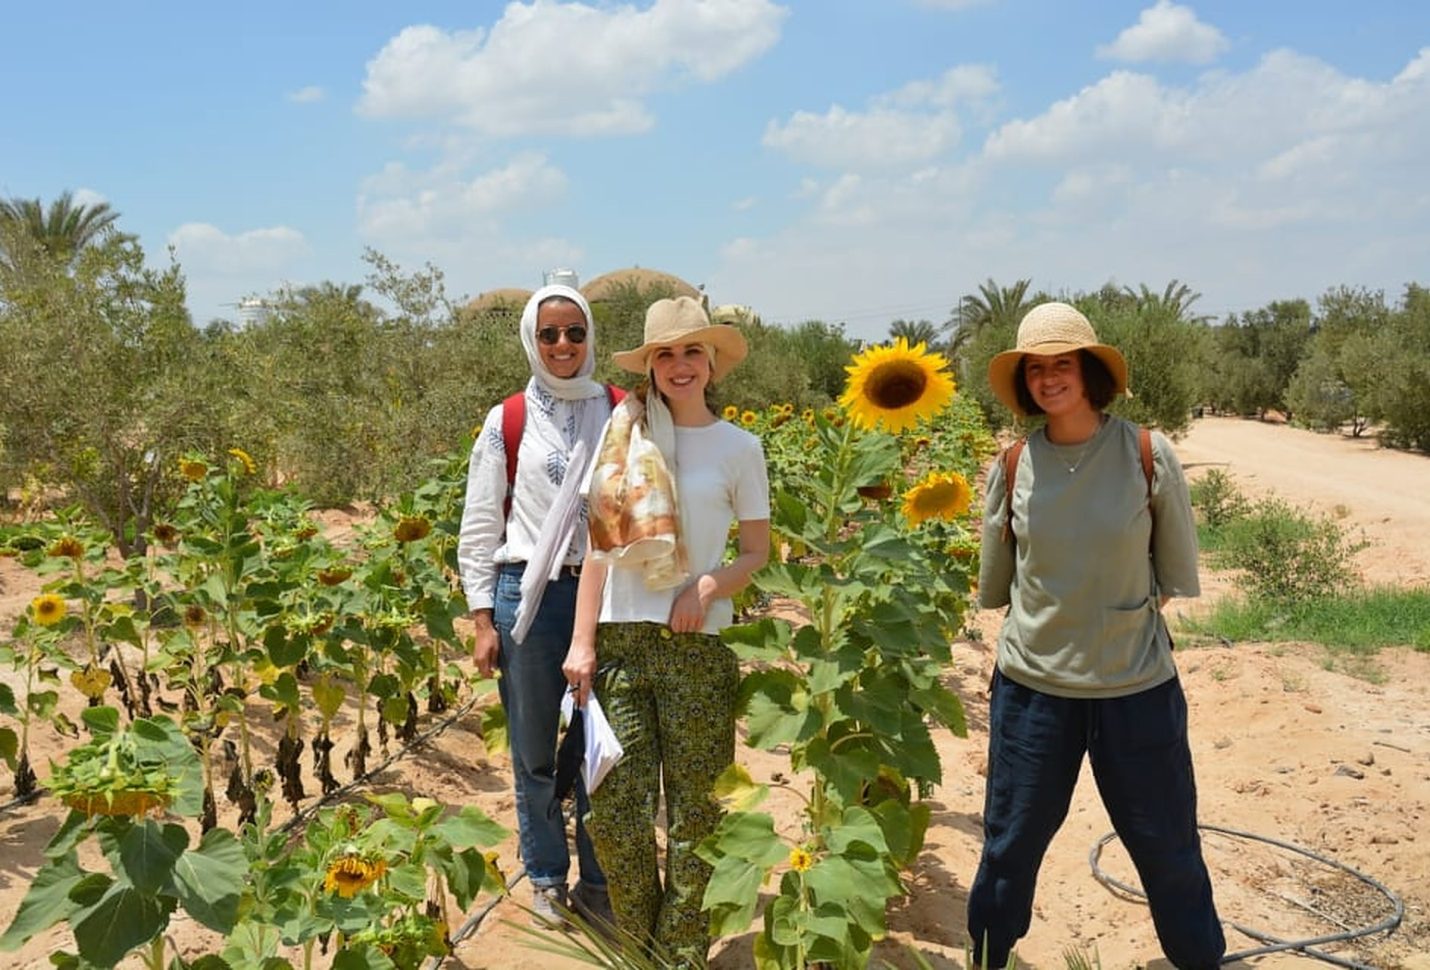 Agritourism beacon of hope for Egypt to create resilient livelihoods, promote sustainability